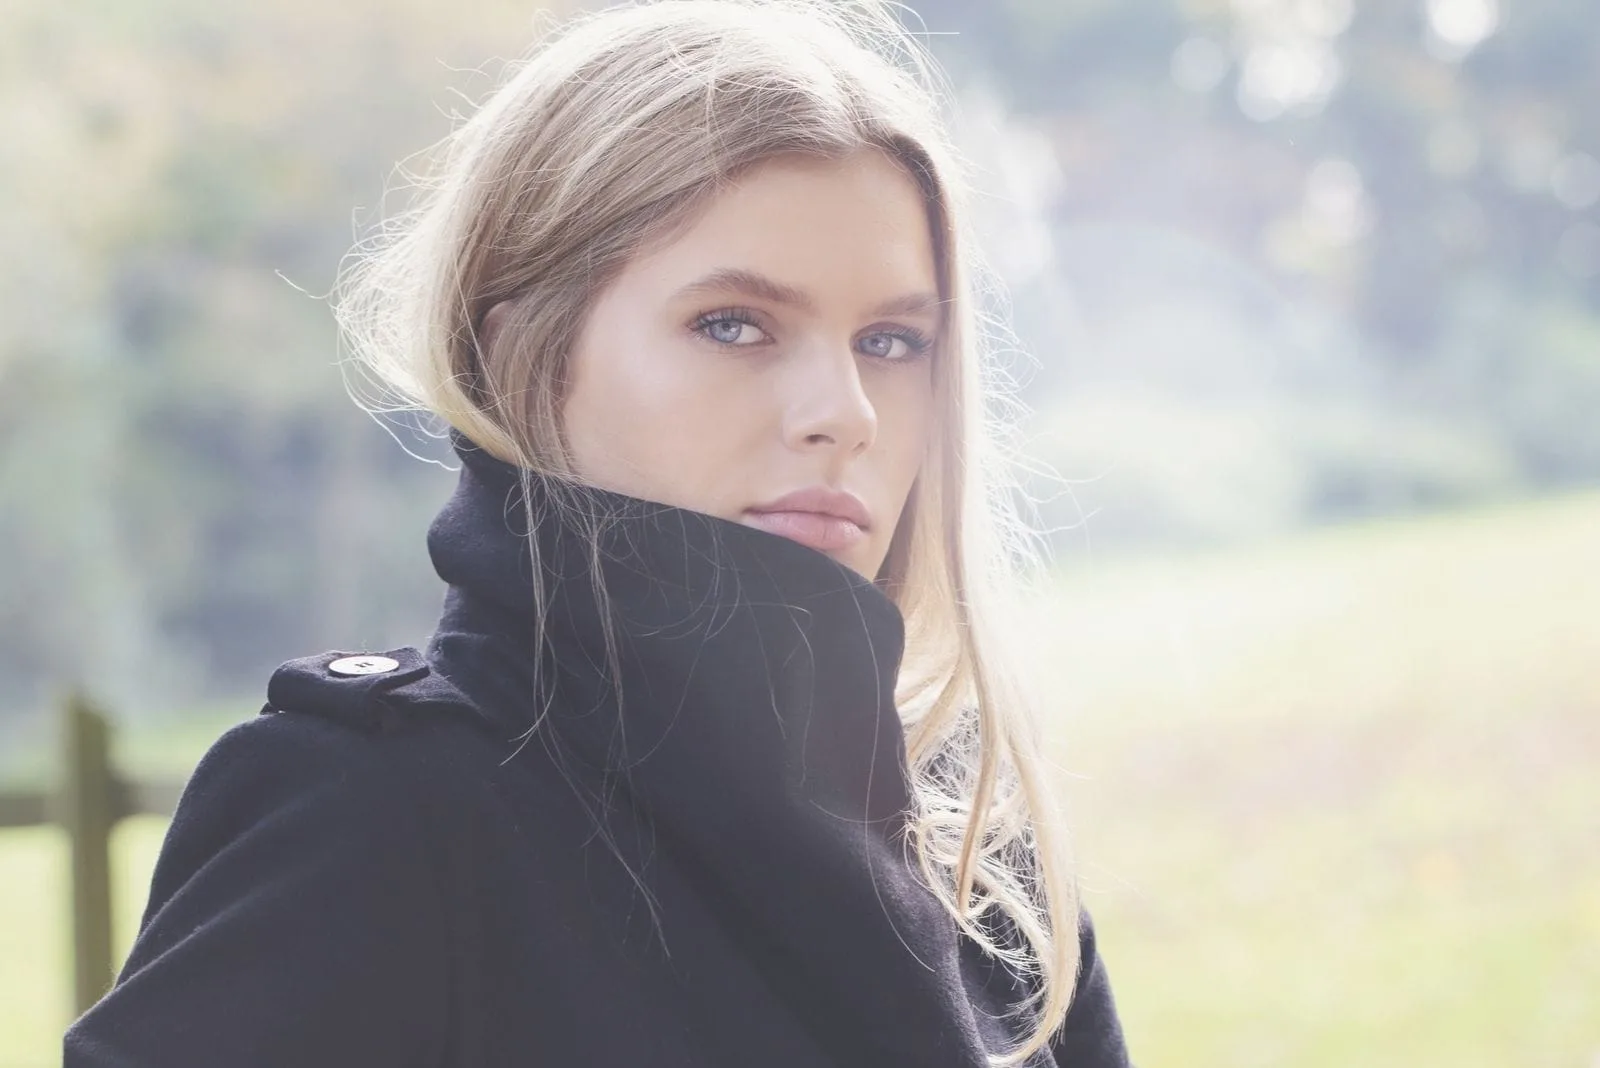 beautiful woman staring at the camera thoughtfully wearing coat standing outdoors